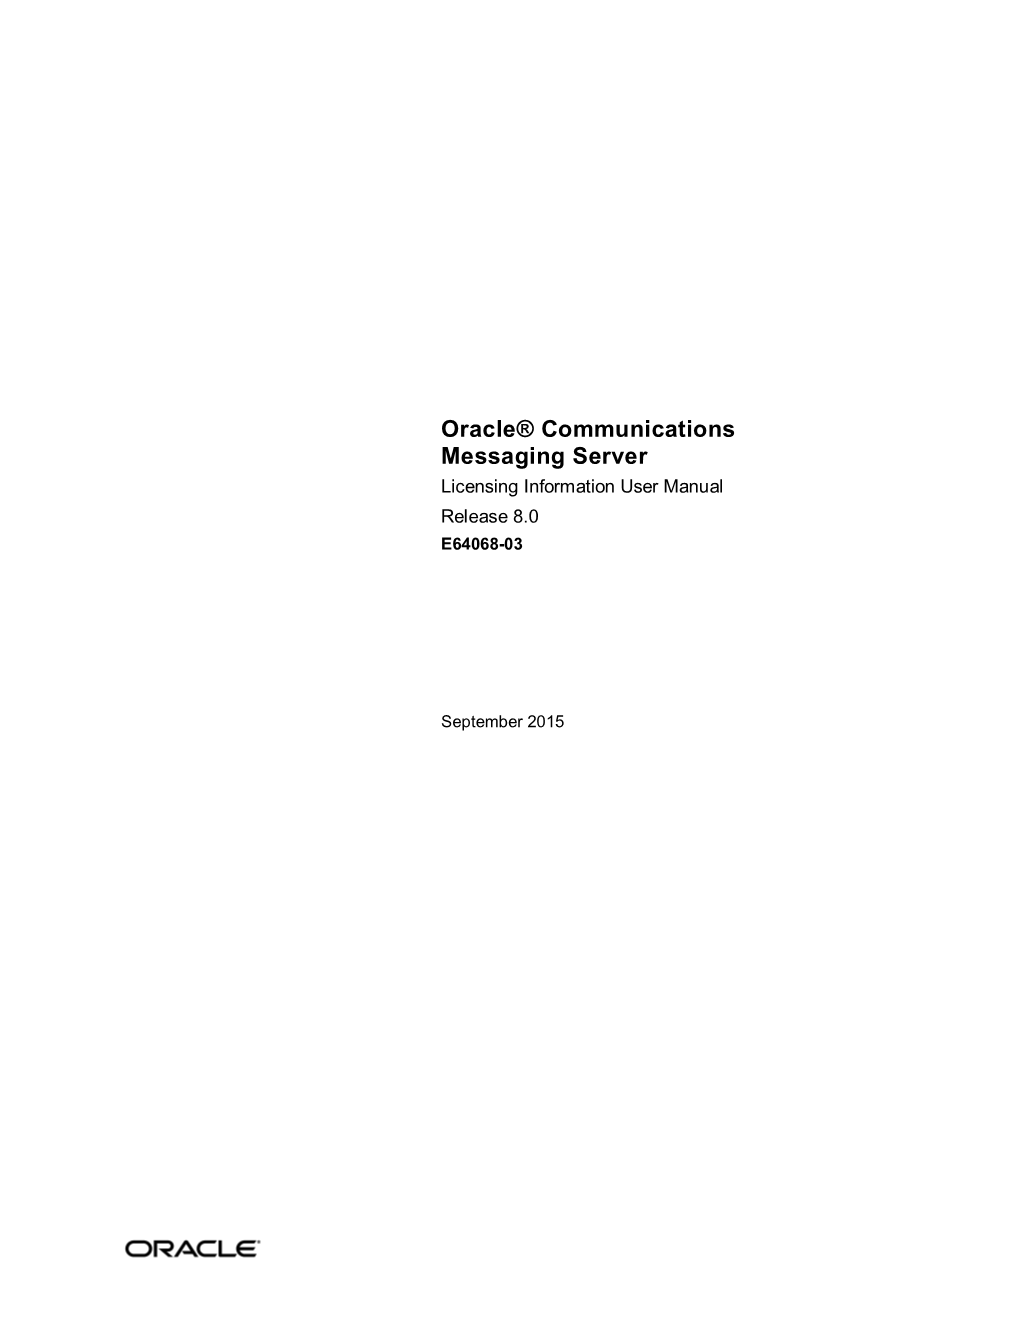 Oracle Communications Messaging Server Licensing Information User Manual Third-Party Notices